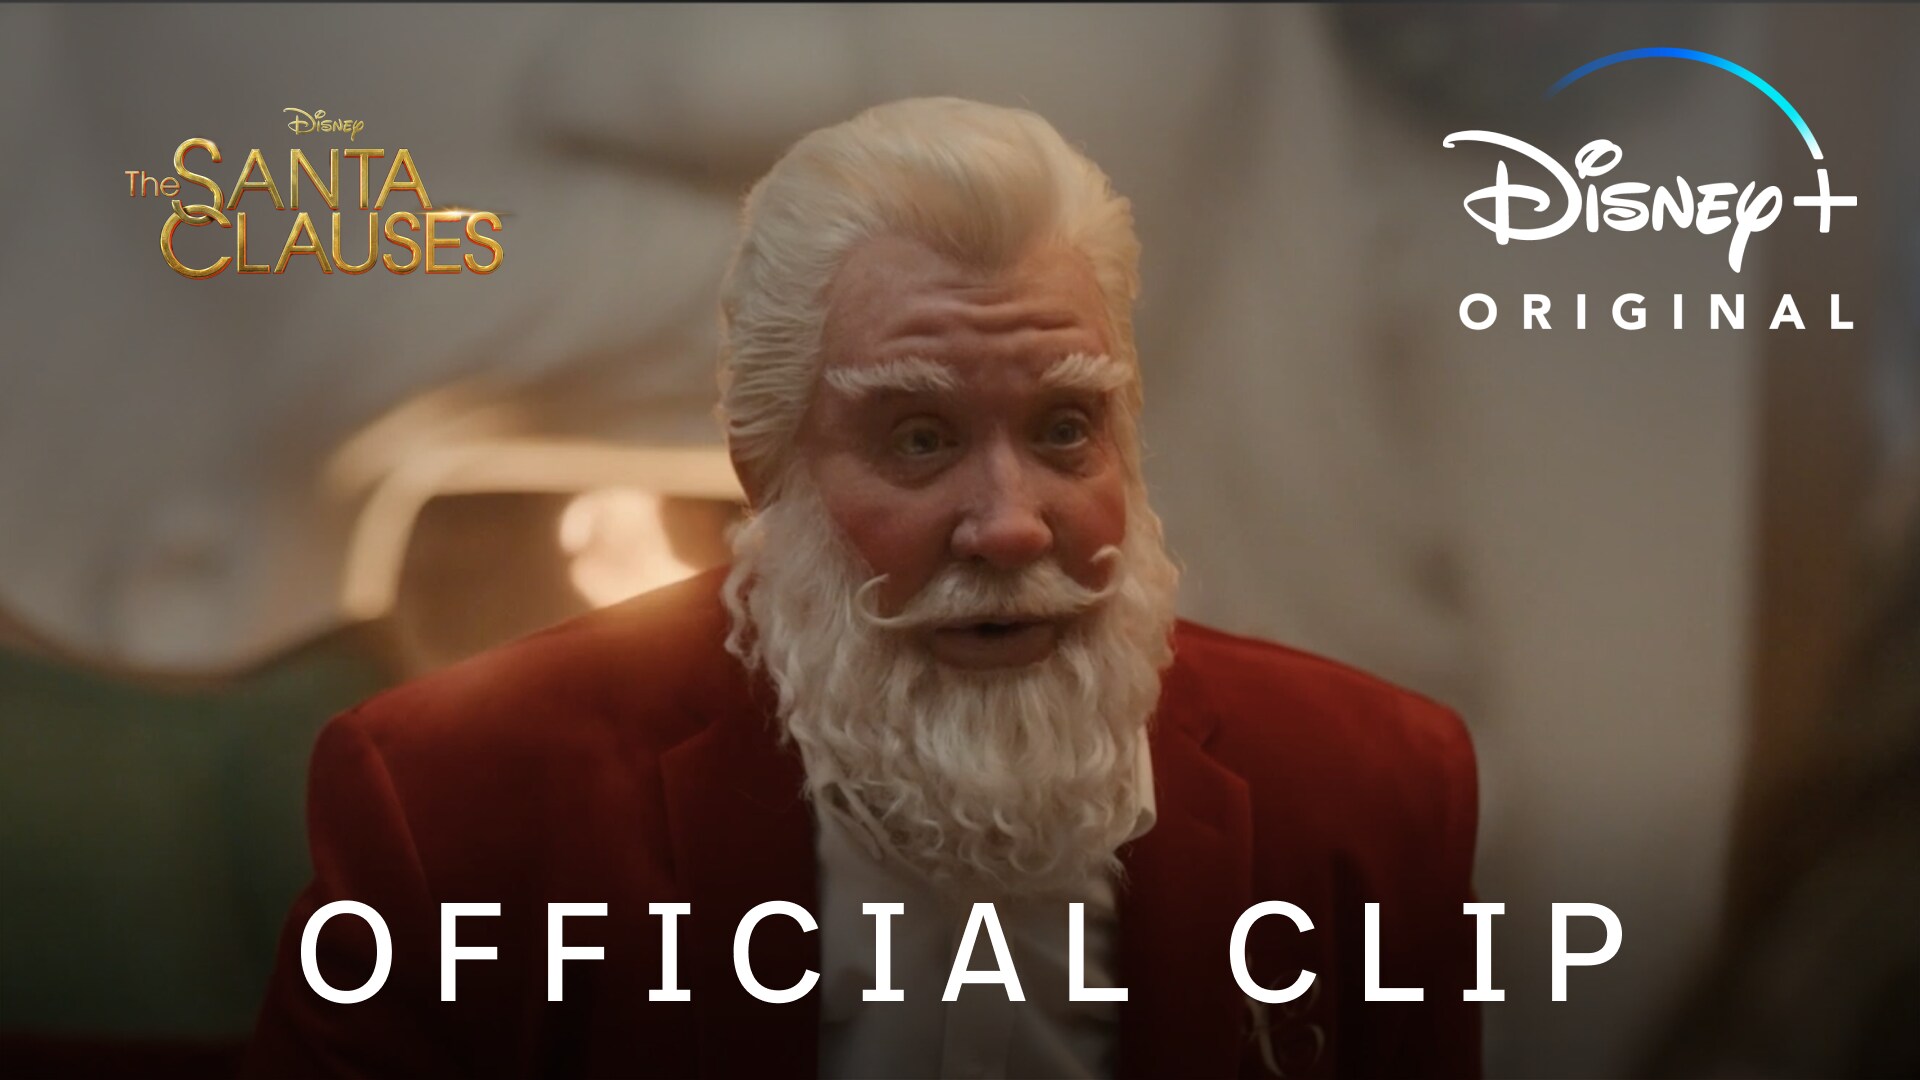 Keeper of the Creatures | The Santa Clauses | Disney+